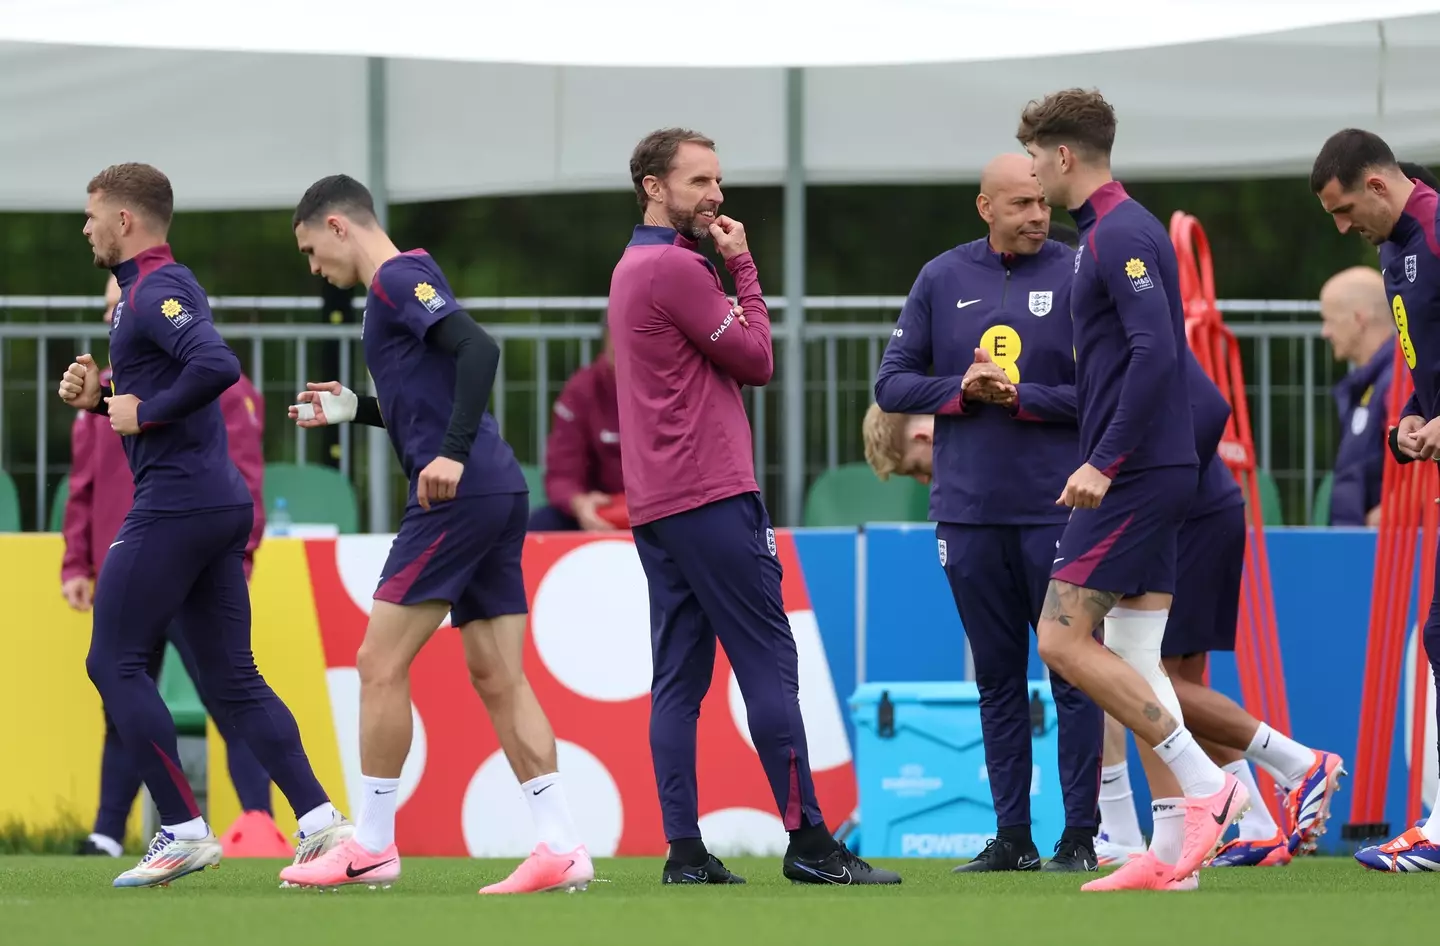 The team practiced the back three in training. (Richard Pelham/Getty Images)